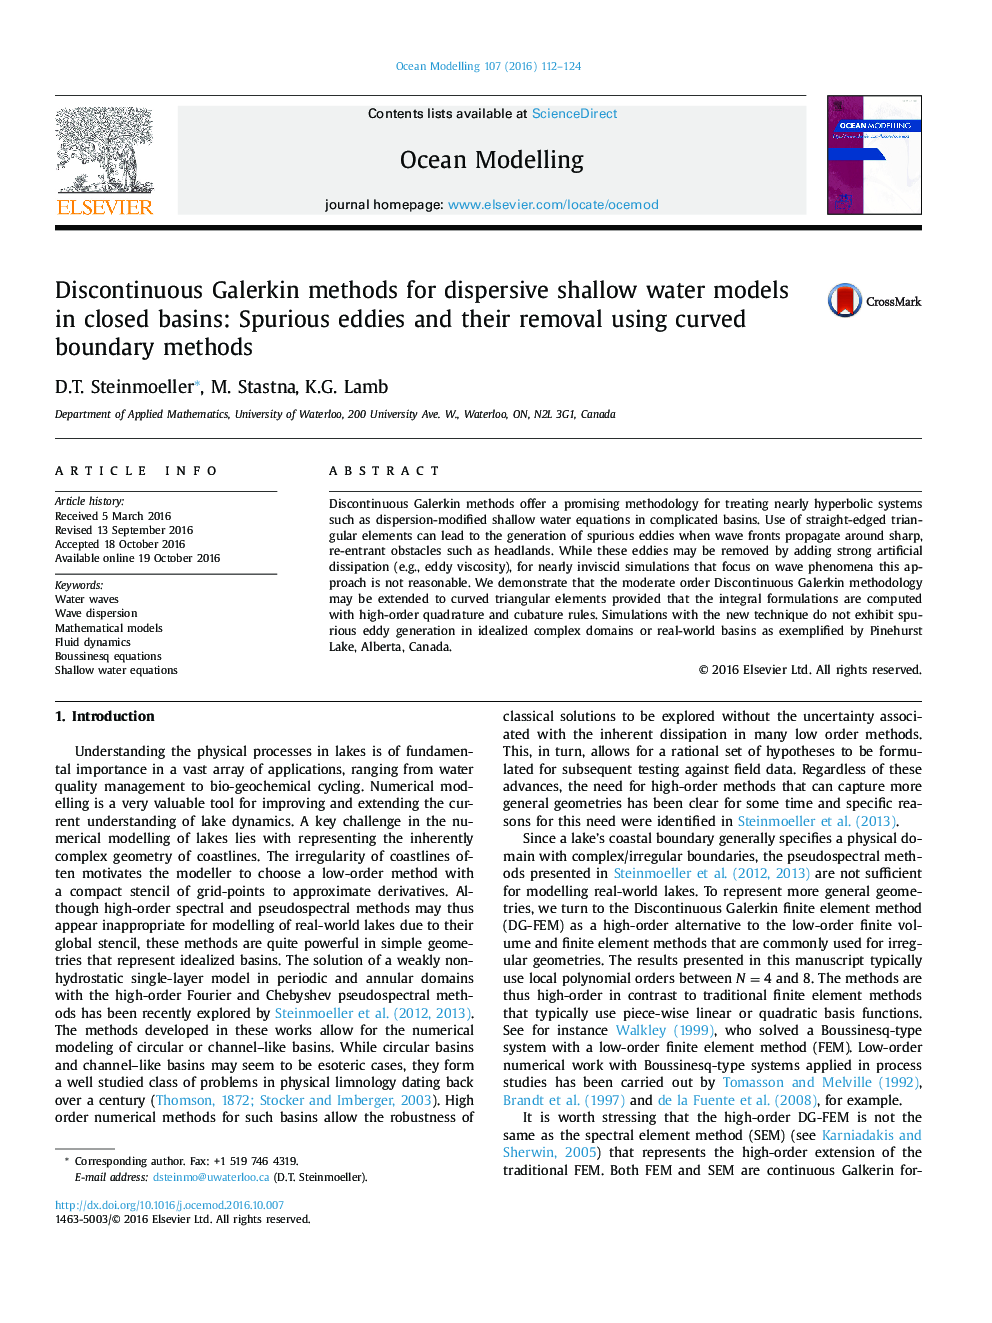 Discontinuous Galerkin methods for dispersive shallow water models in closed basins: Spurious eddies and their removal using curved boundary methods